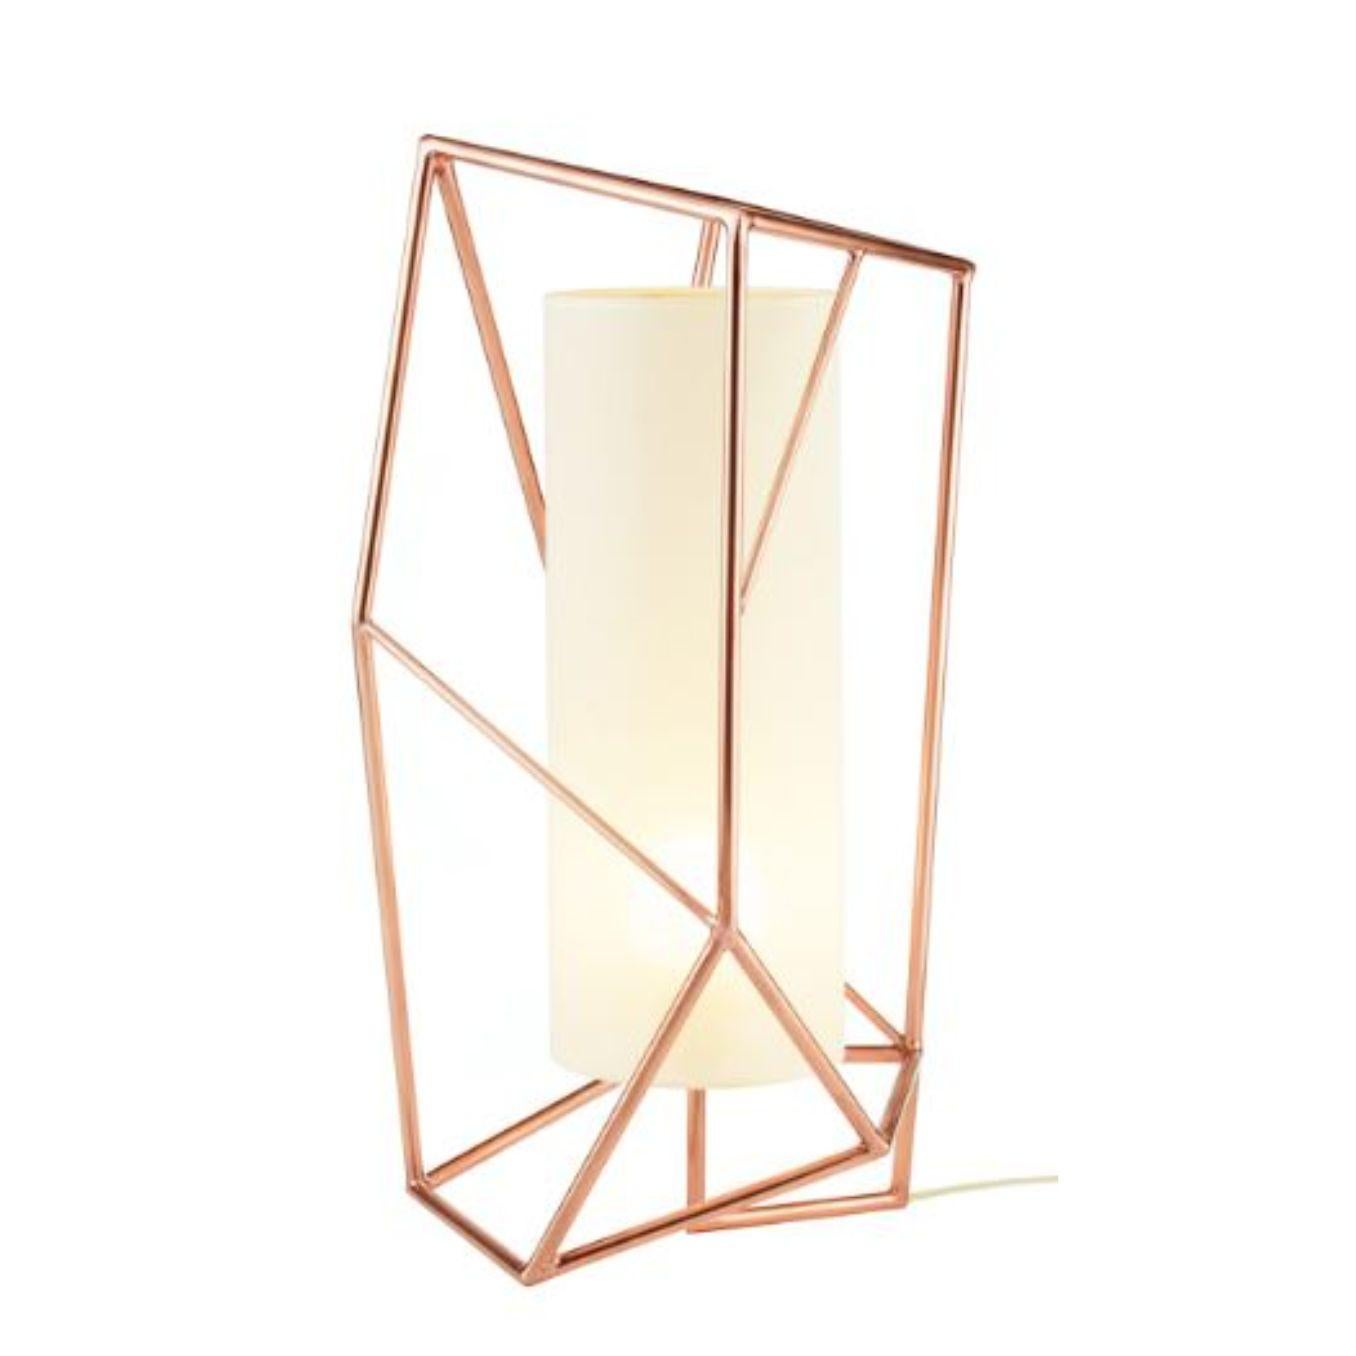 Copper Star table lamp by Dooq
Dimensions: W 33 x D 33 x H 72 cm
Materials: lacquered metal, polished or satin metal, copper.
abat-jour: linen
Also available in different colors and materials.

Information:
230V/50Hz
E27/1x10W